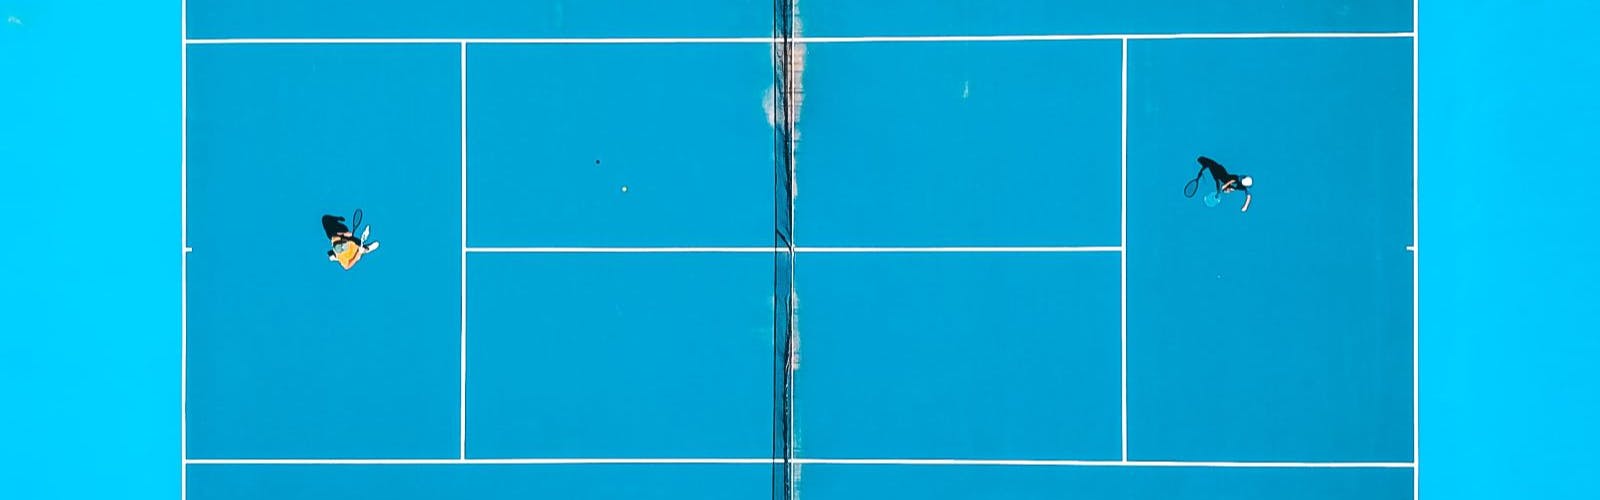 A teal tennis court from above with one person playing on each side of the net.